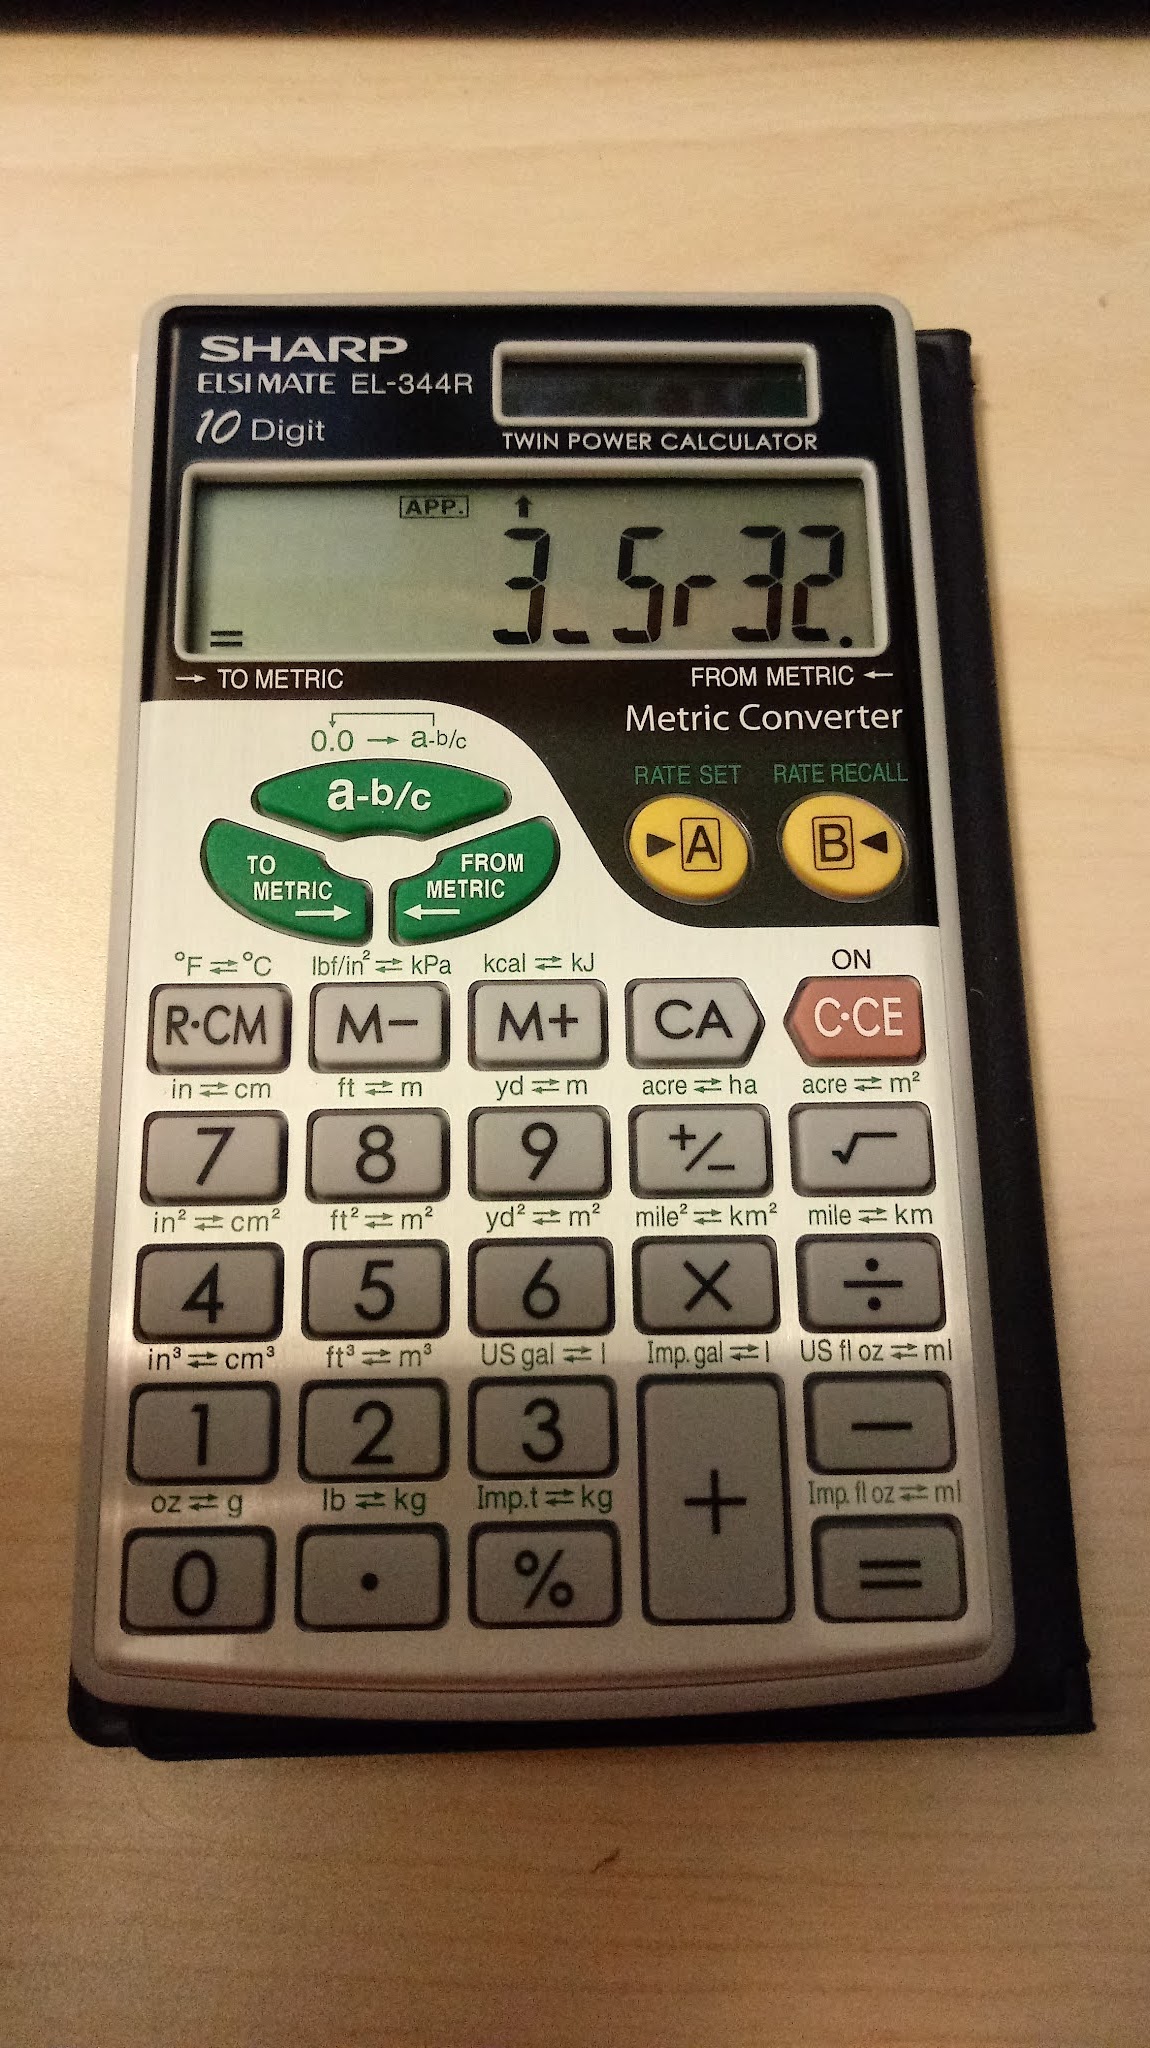 eddie-s-math-and-calculator-blog-review-sharp-el-344rb